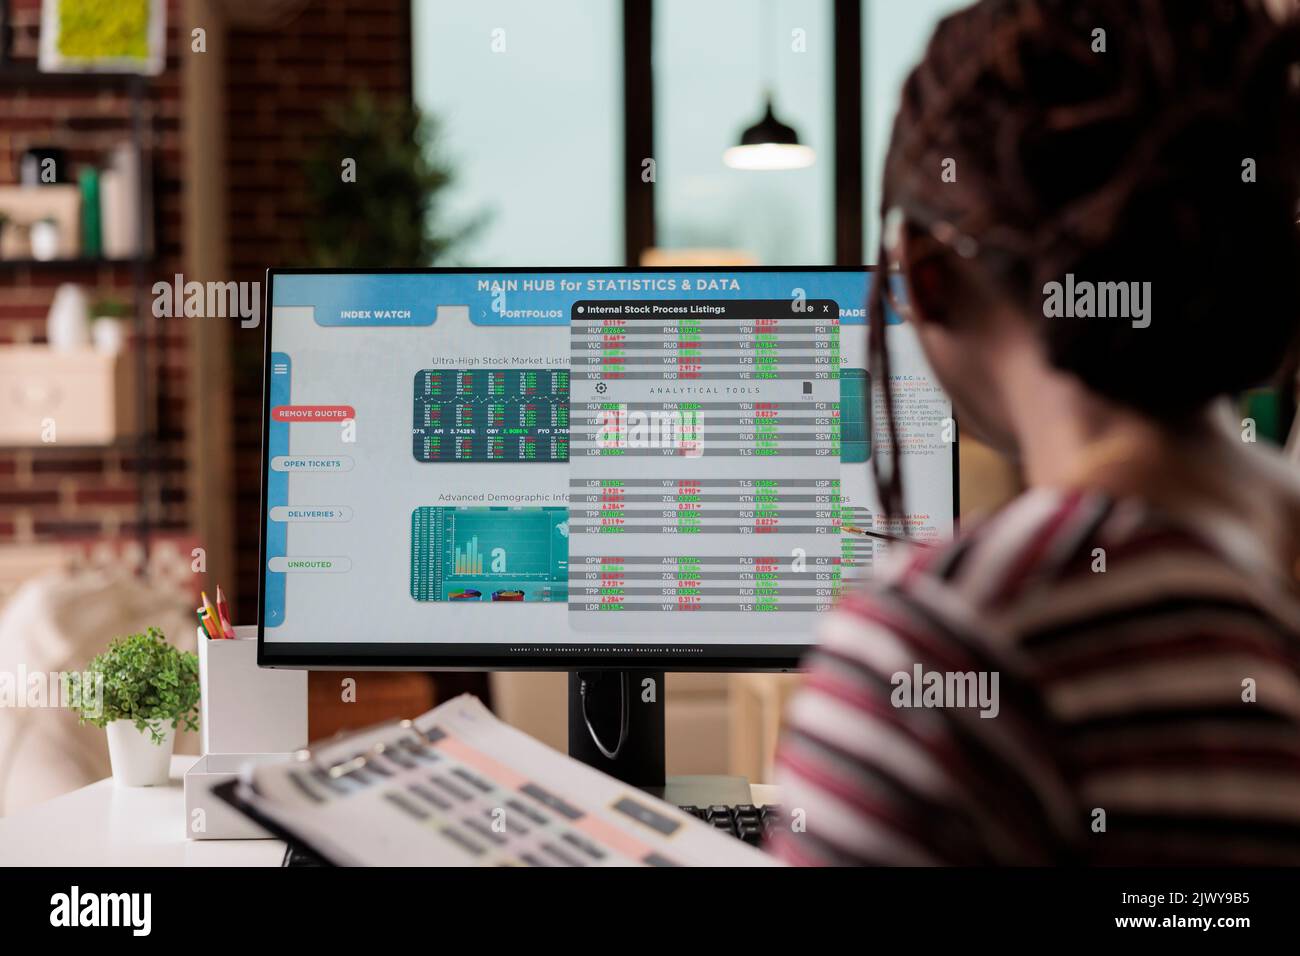 Woman working with internet of things, looking at data on computer screen, analyzing statistics. Web3, iot technology, web based online application for work, business innovation concept Stock Photo